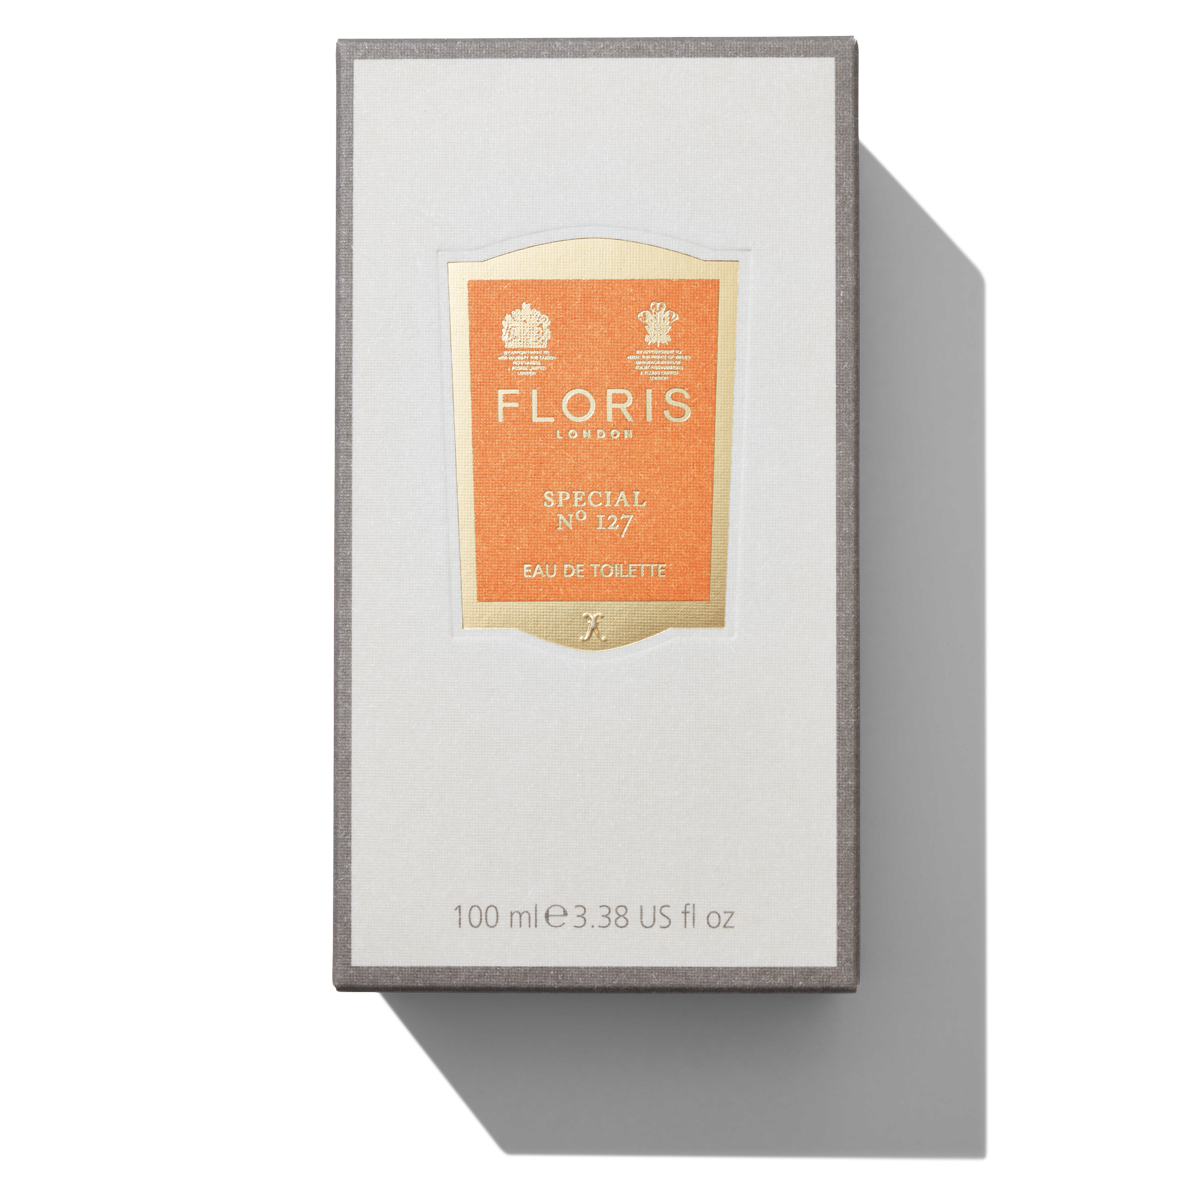 100ml White and Grey box with Orange Special No 127 label